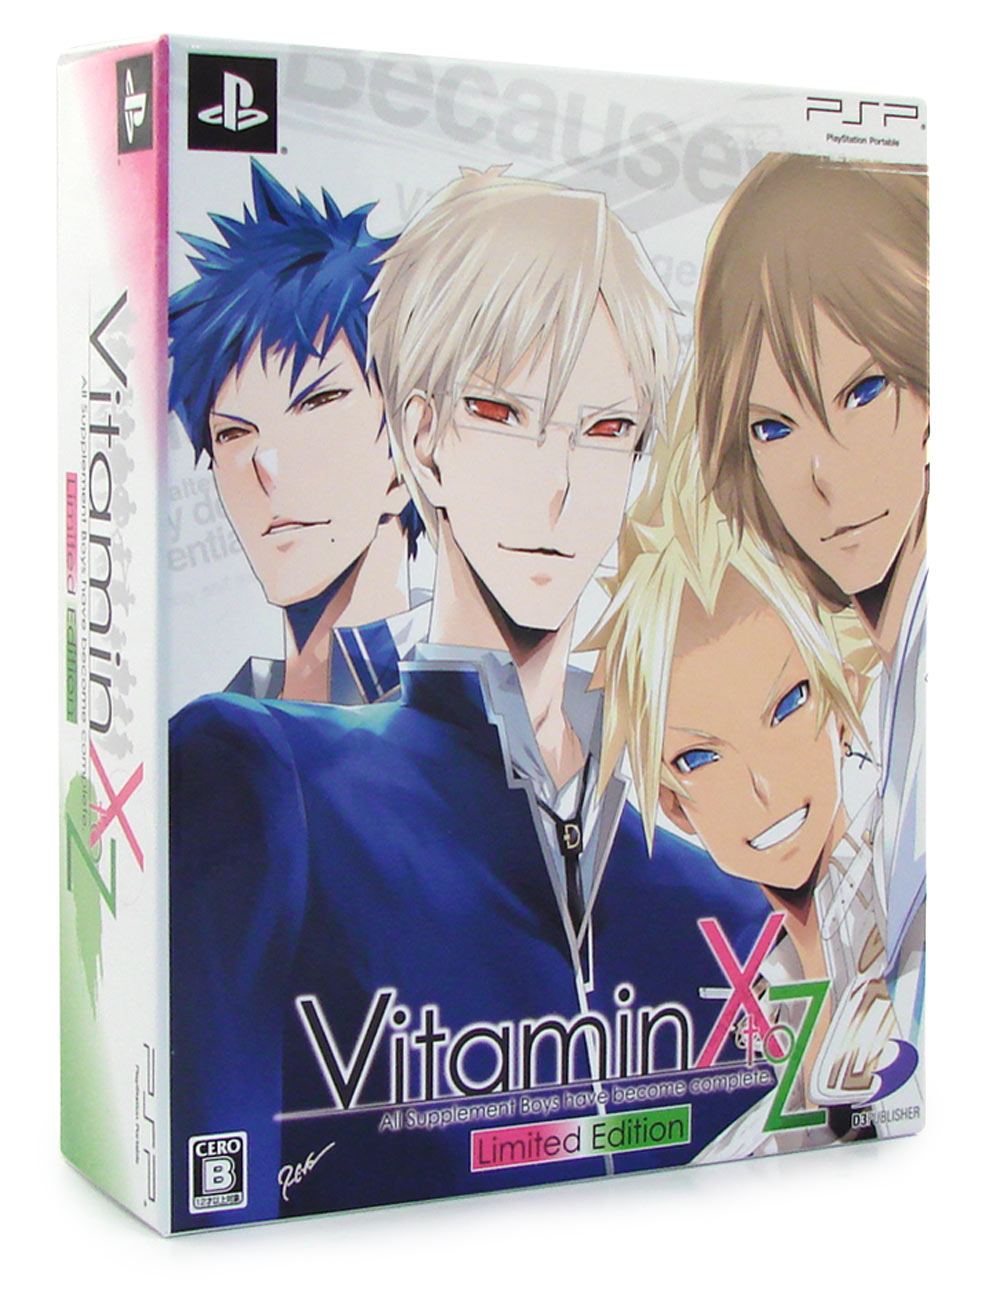 Vitamin X to Z [Limited Edition] for Sony PSP - Bitcoin 